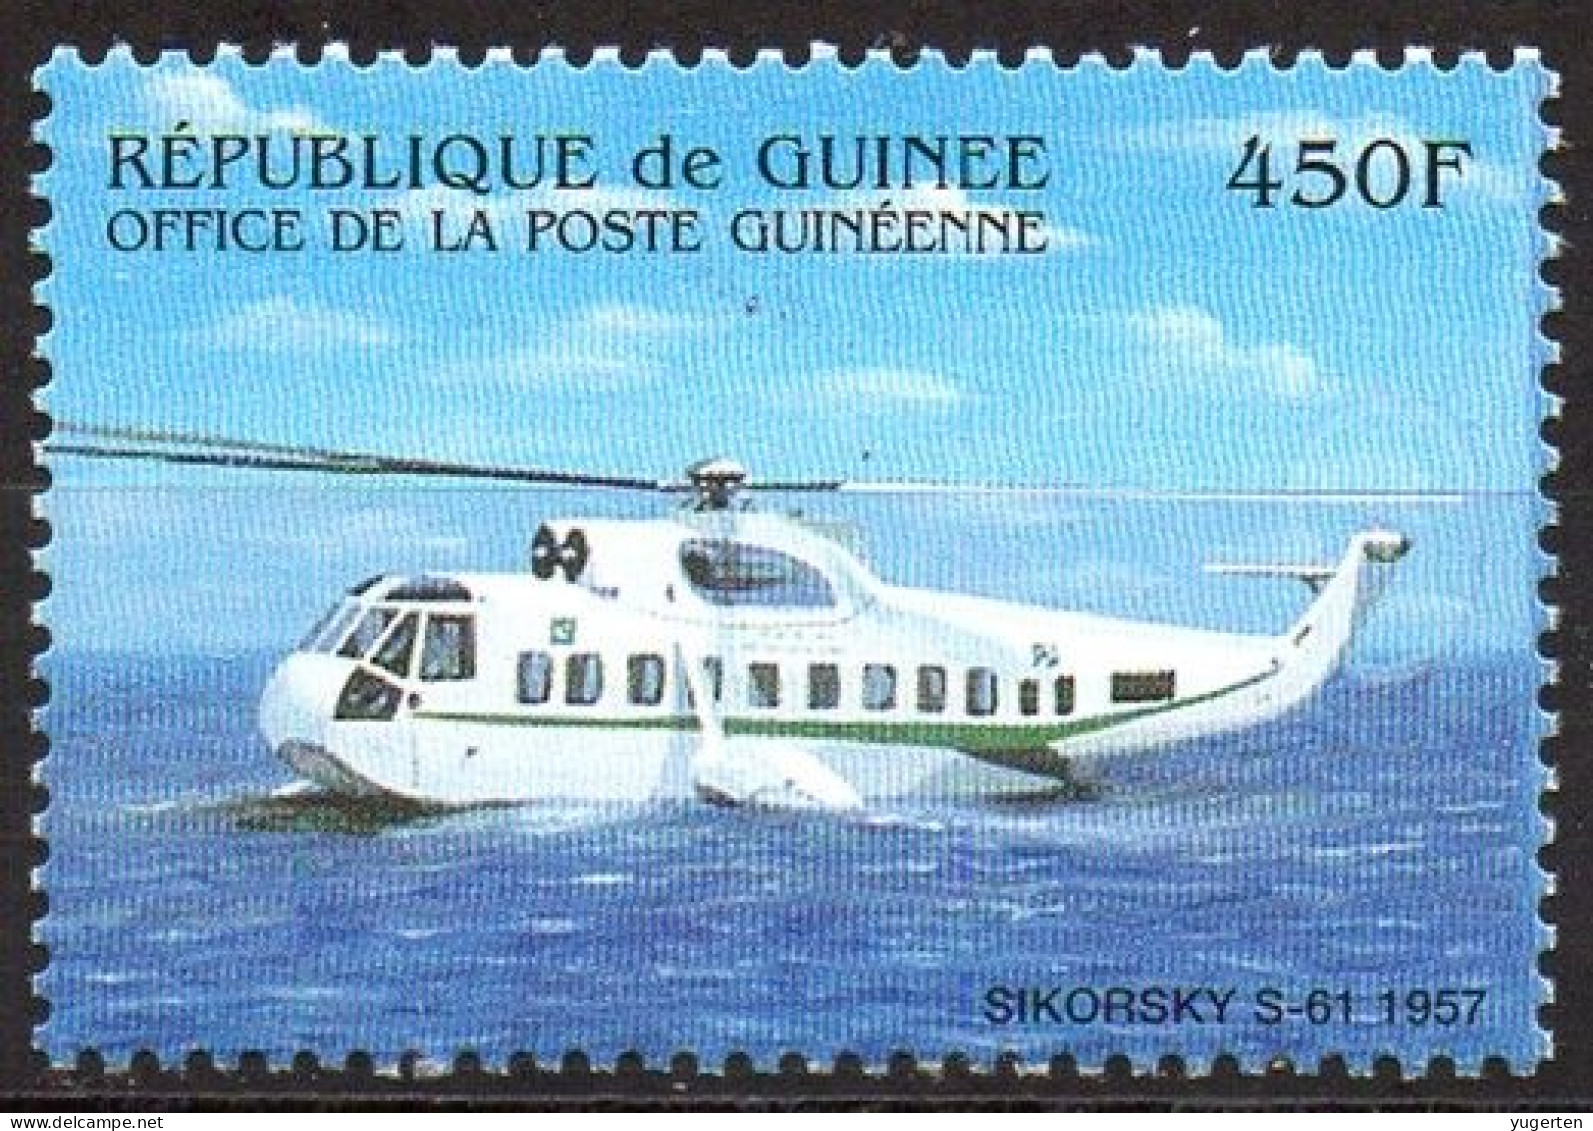 GUINEA - 1v - MNH - Helicopter - Helicopters - SIKORSKY - Hubschrauber Helicópteros Elicotteri Hélicoptère - Hélicoptères